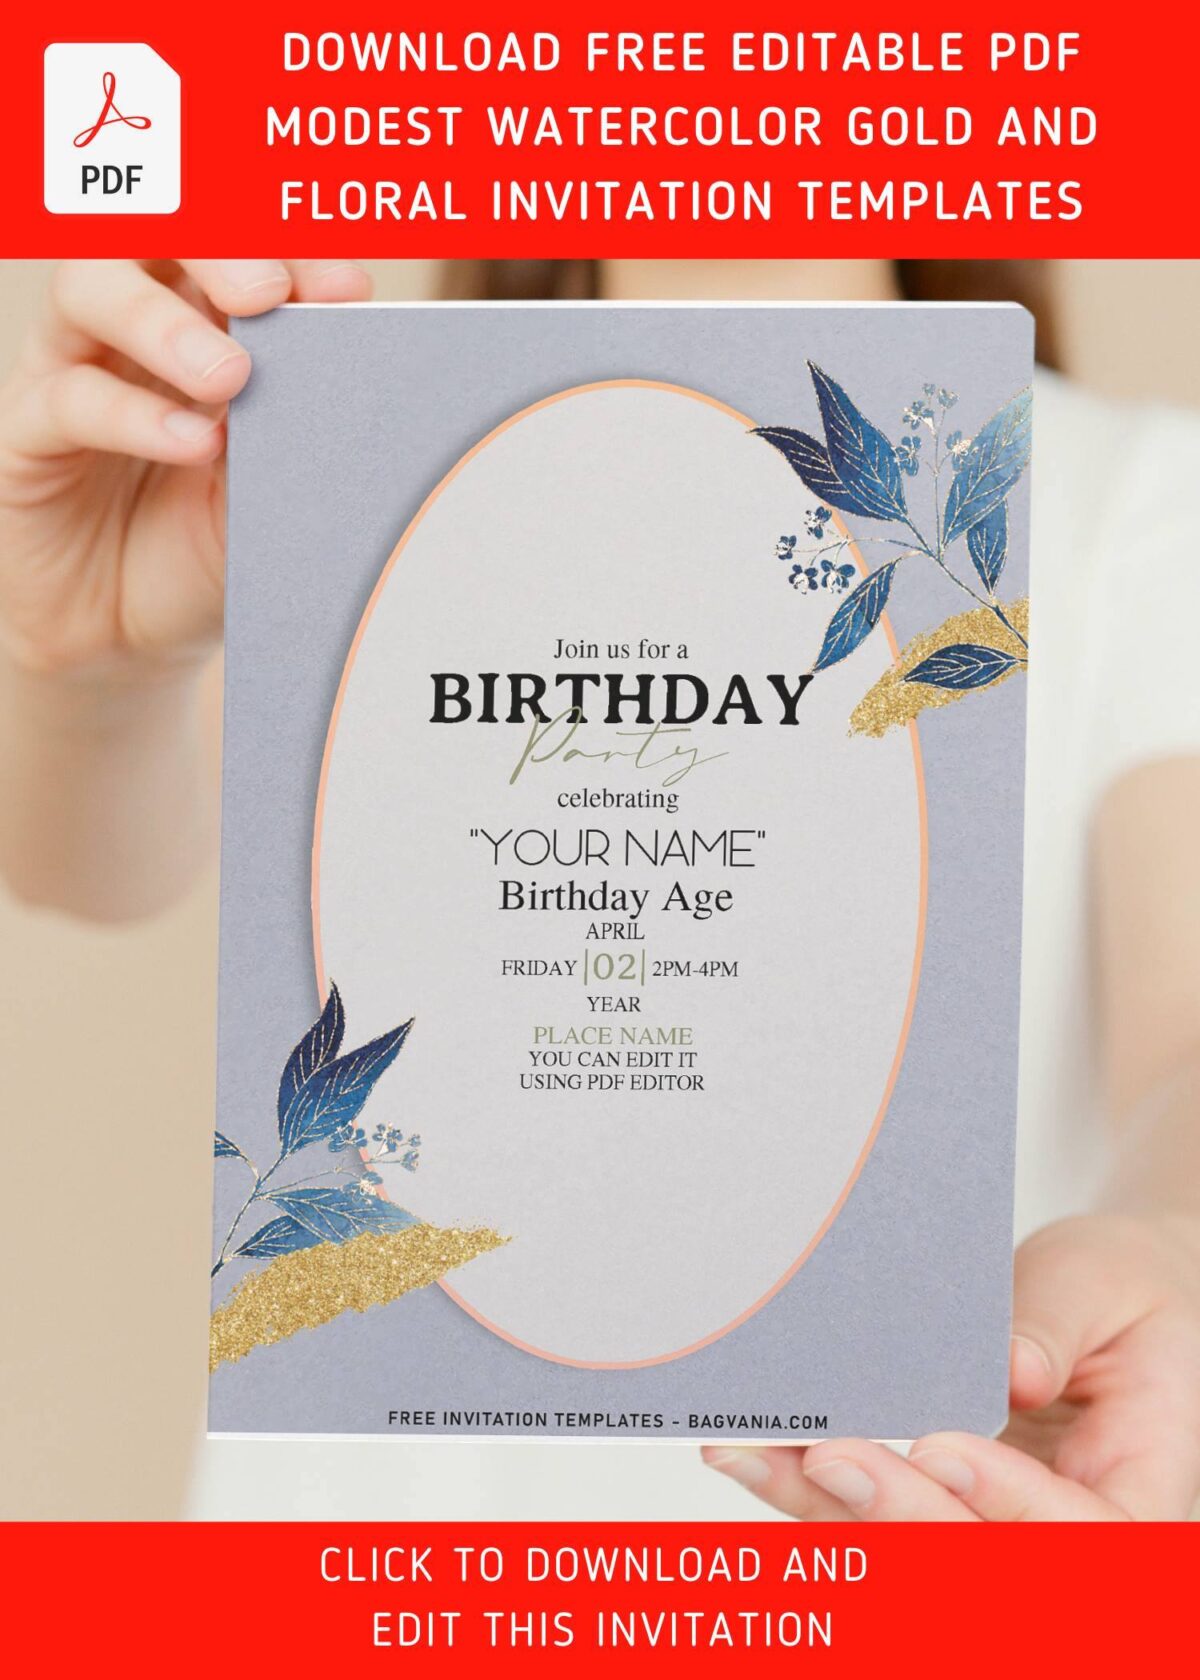 (Free Editable PDF) Simply Gorgeous Blue Foliage Invitation Templates with stunning gold sparkles